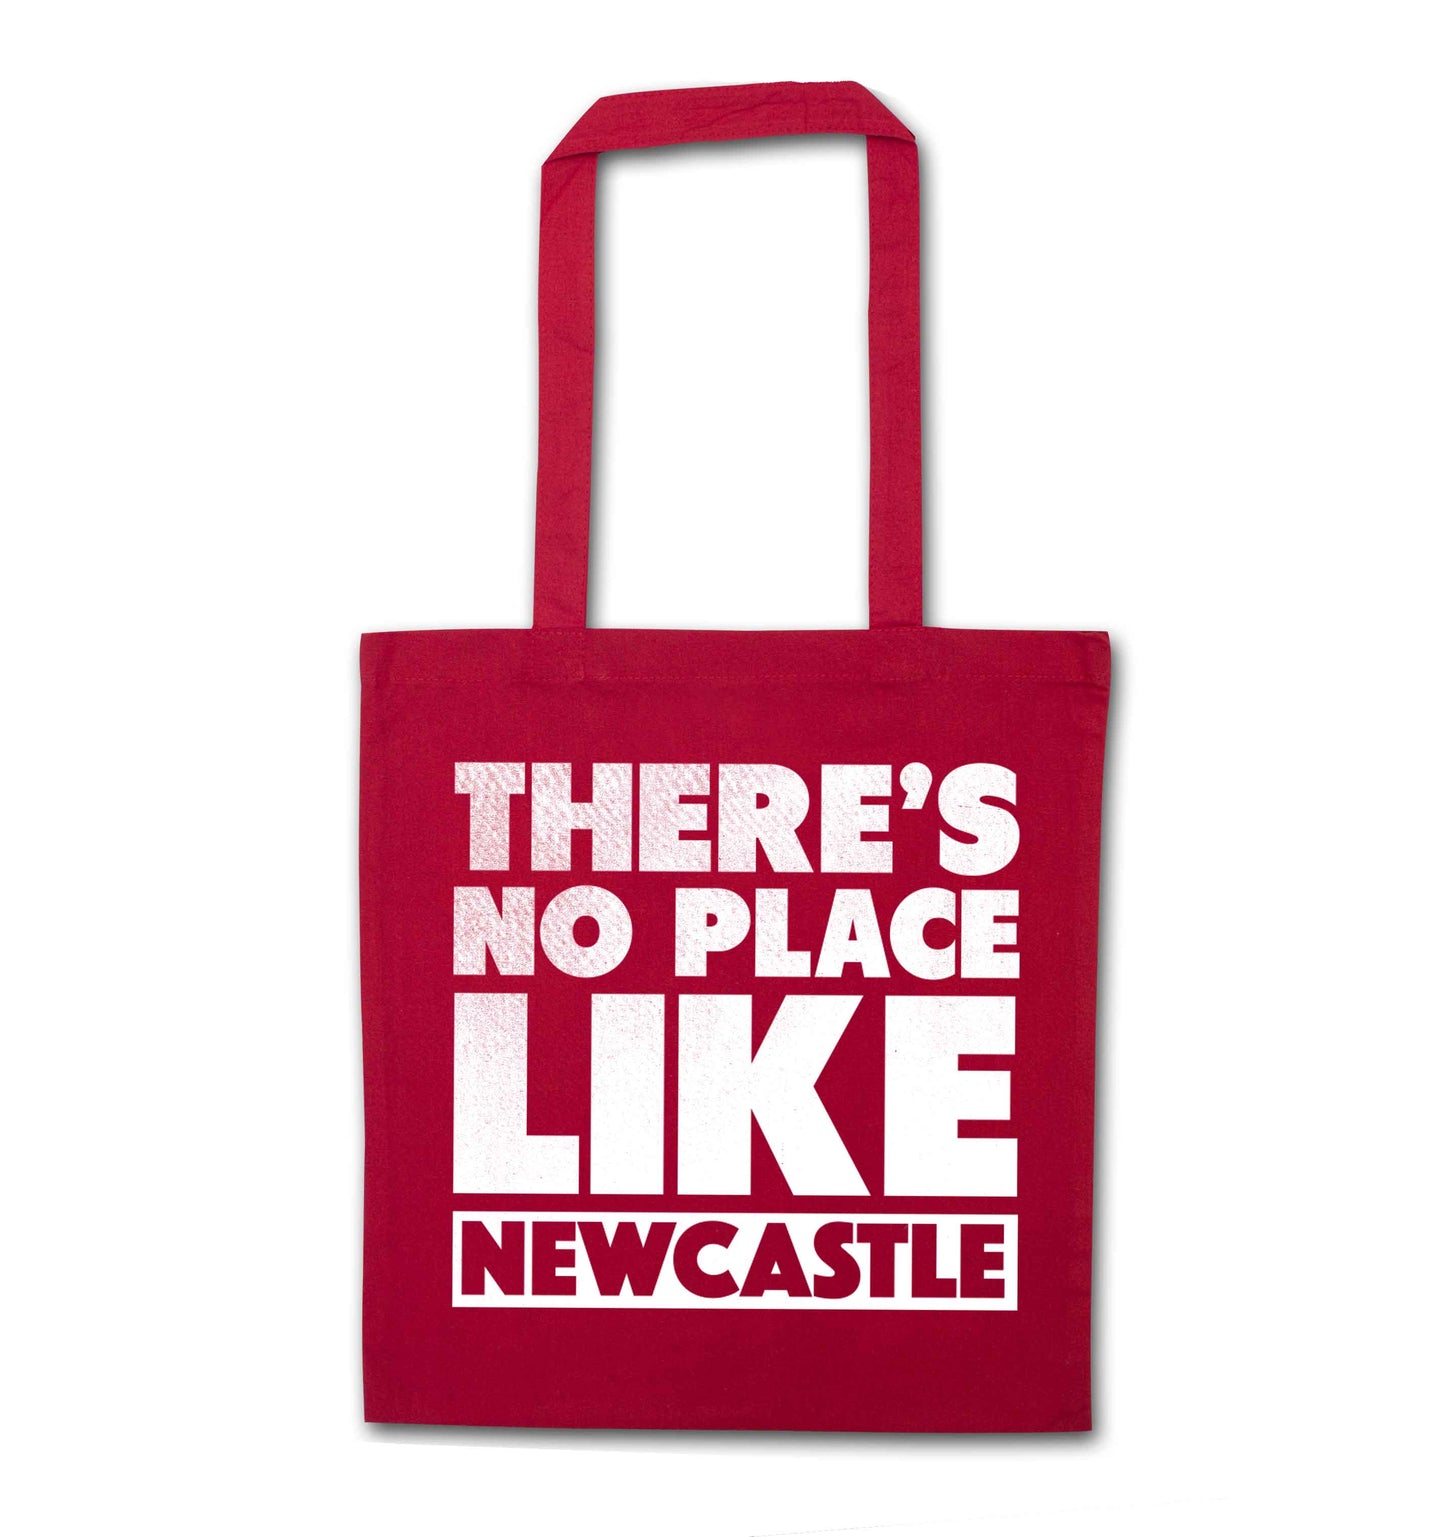 There's no place like Newcastle red tote bag